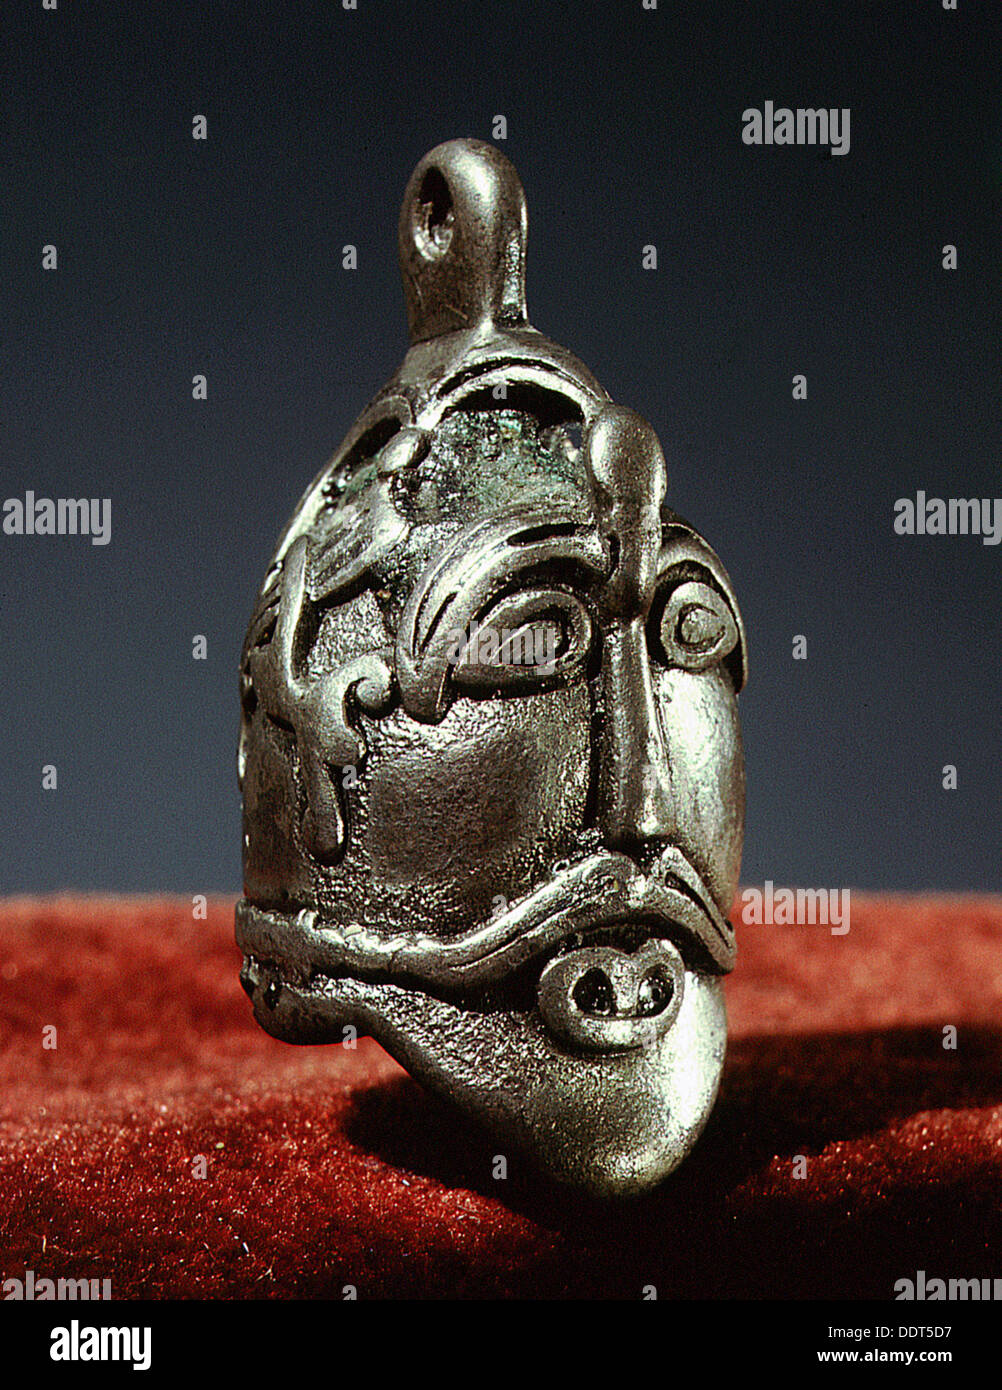 Viking Silver Jewellery High Resolution Stock Photography and Images - Alamy